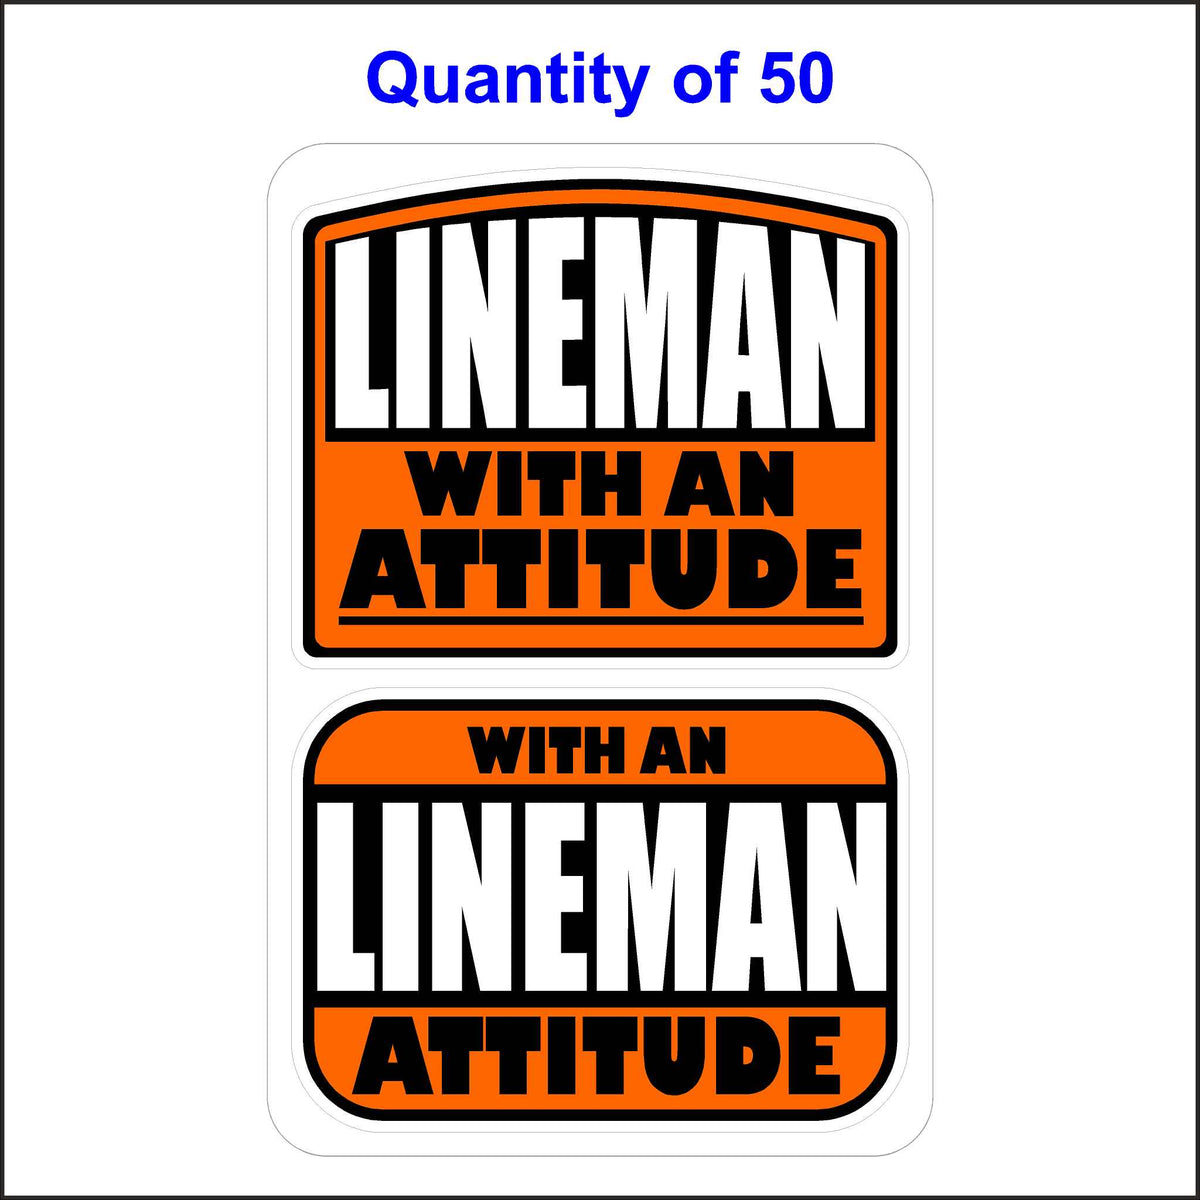 Lineman With An Attitude Stickers 50 Quantity.